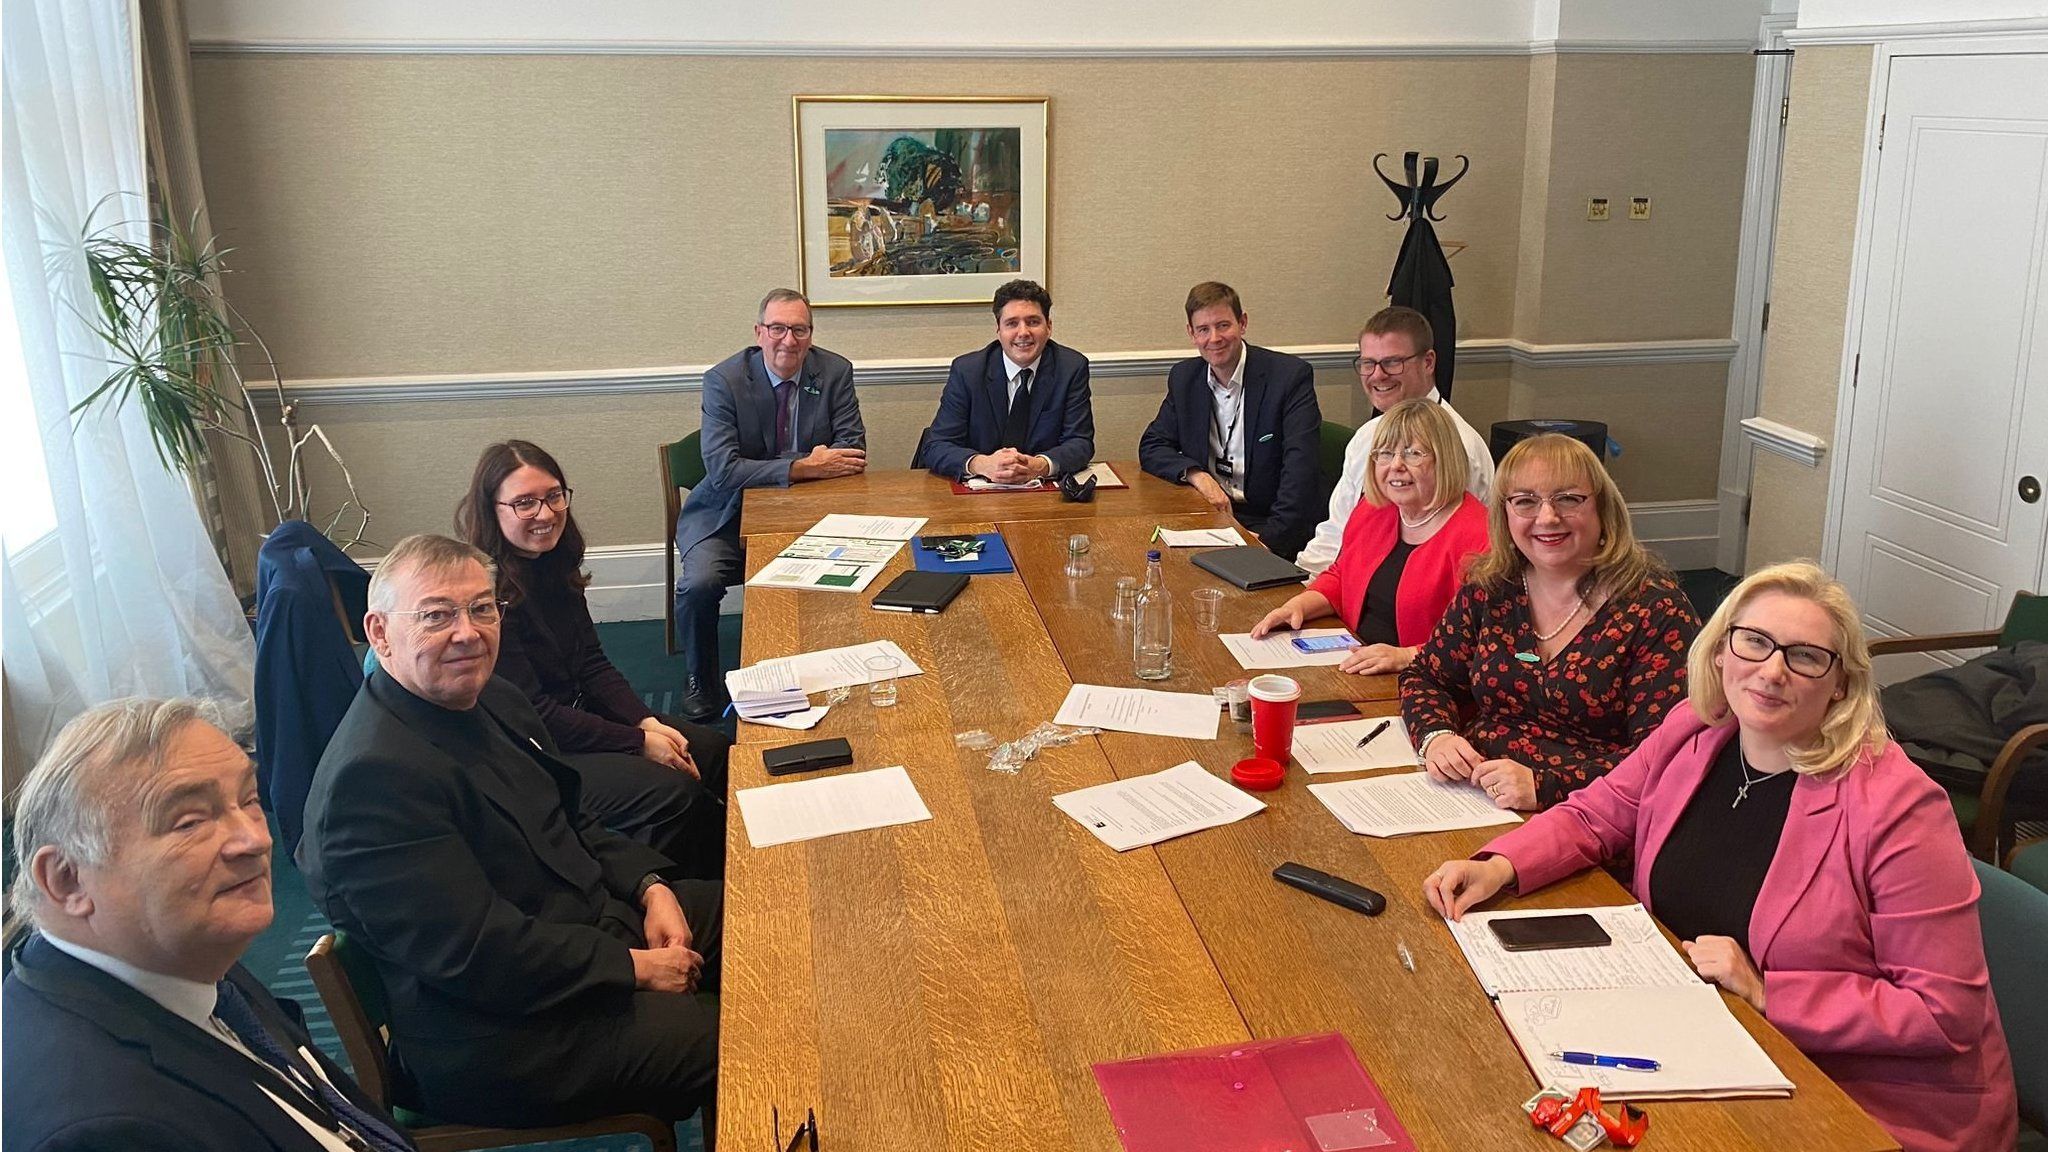 Rail minister Huw Merriman meeting with North East MPs on the All-Party Parliamentary Group (APPG) for the Leamside Line